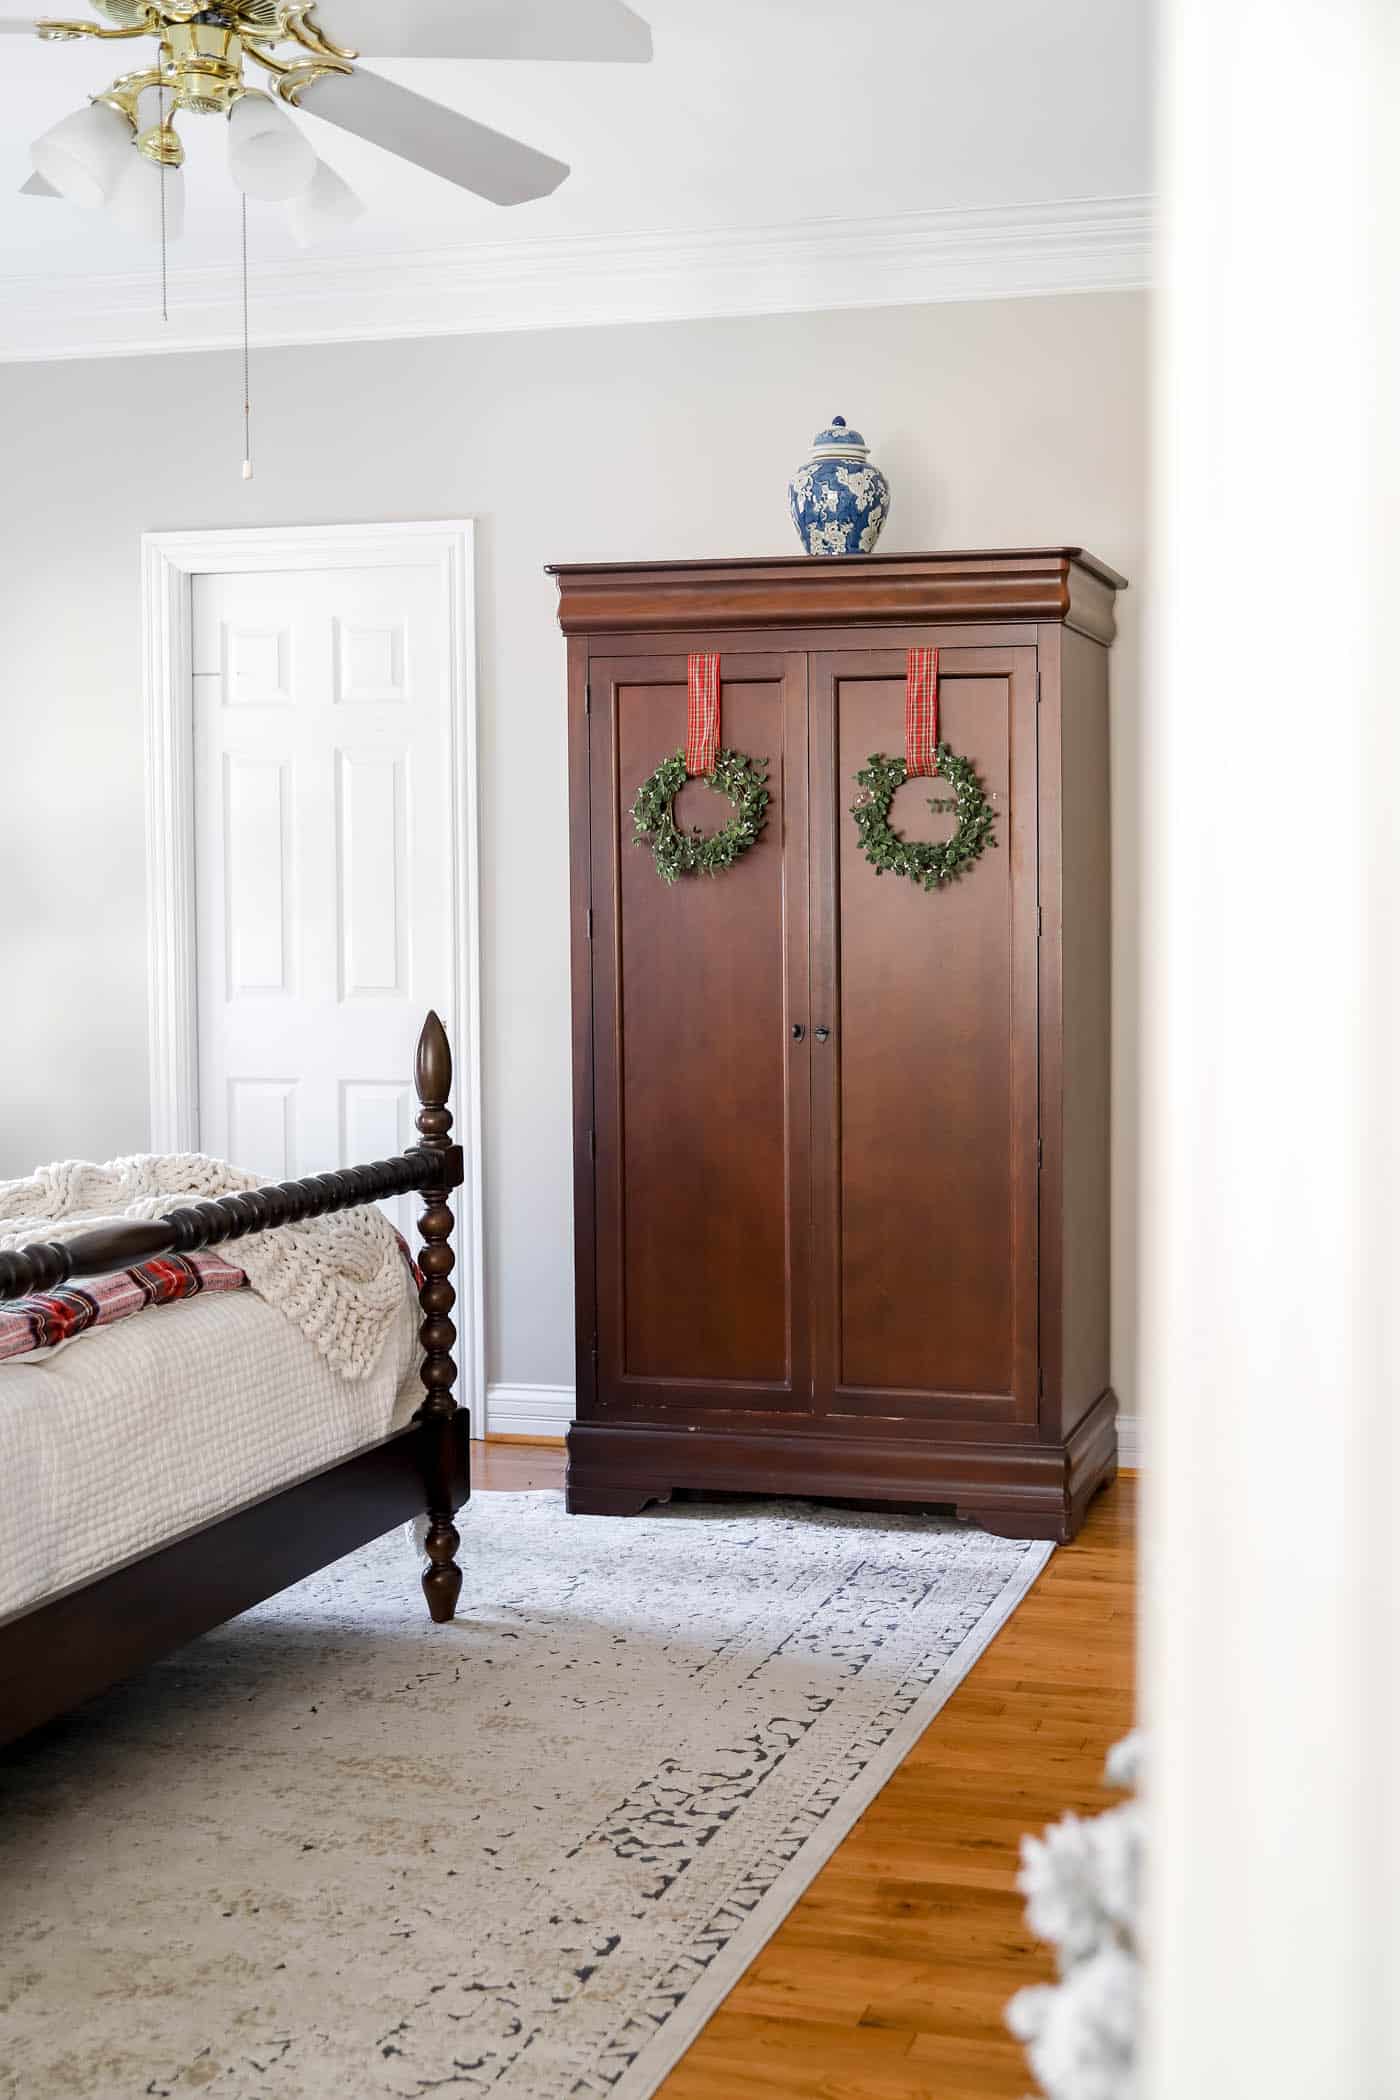 Wreaths on the armoire in Christmas bedroom